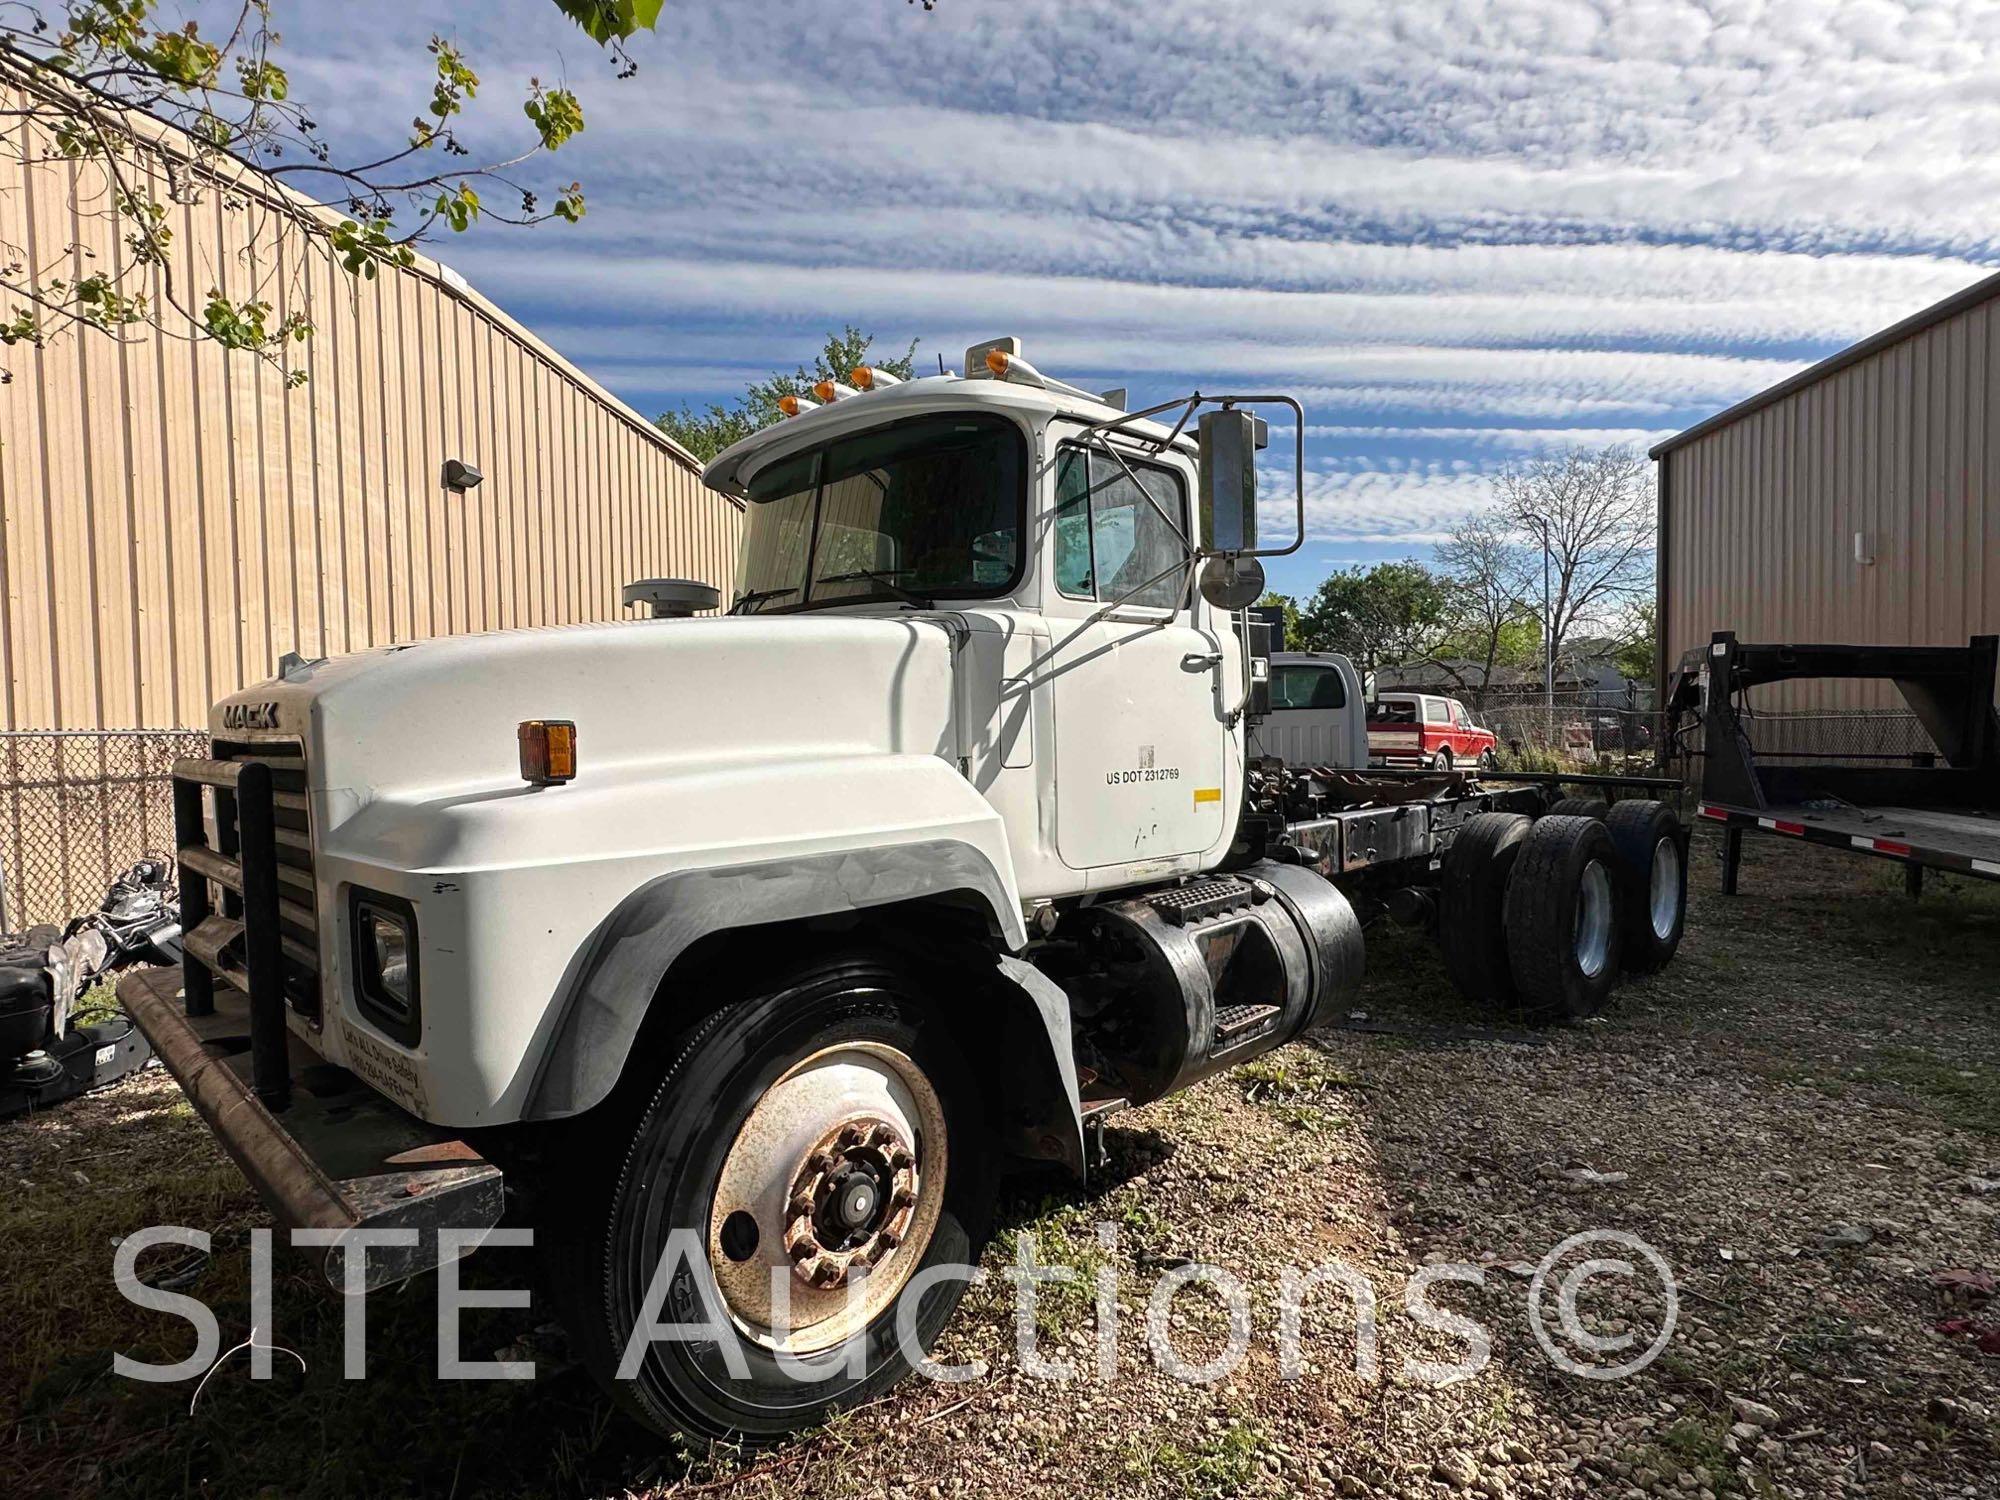 2003 Mack RD688S T/A Cab & Chassis Truck